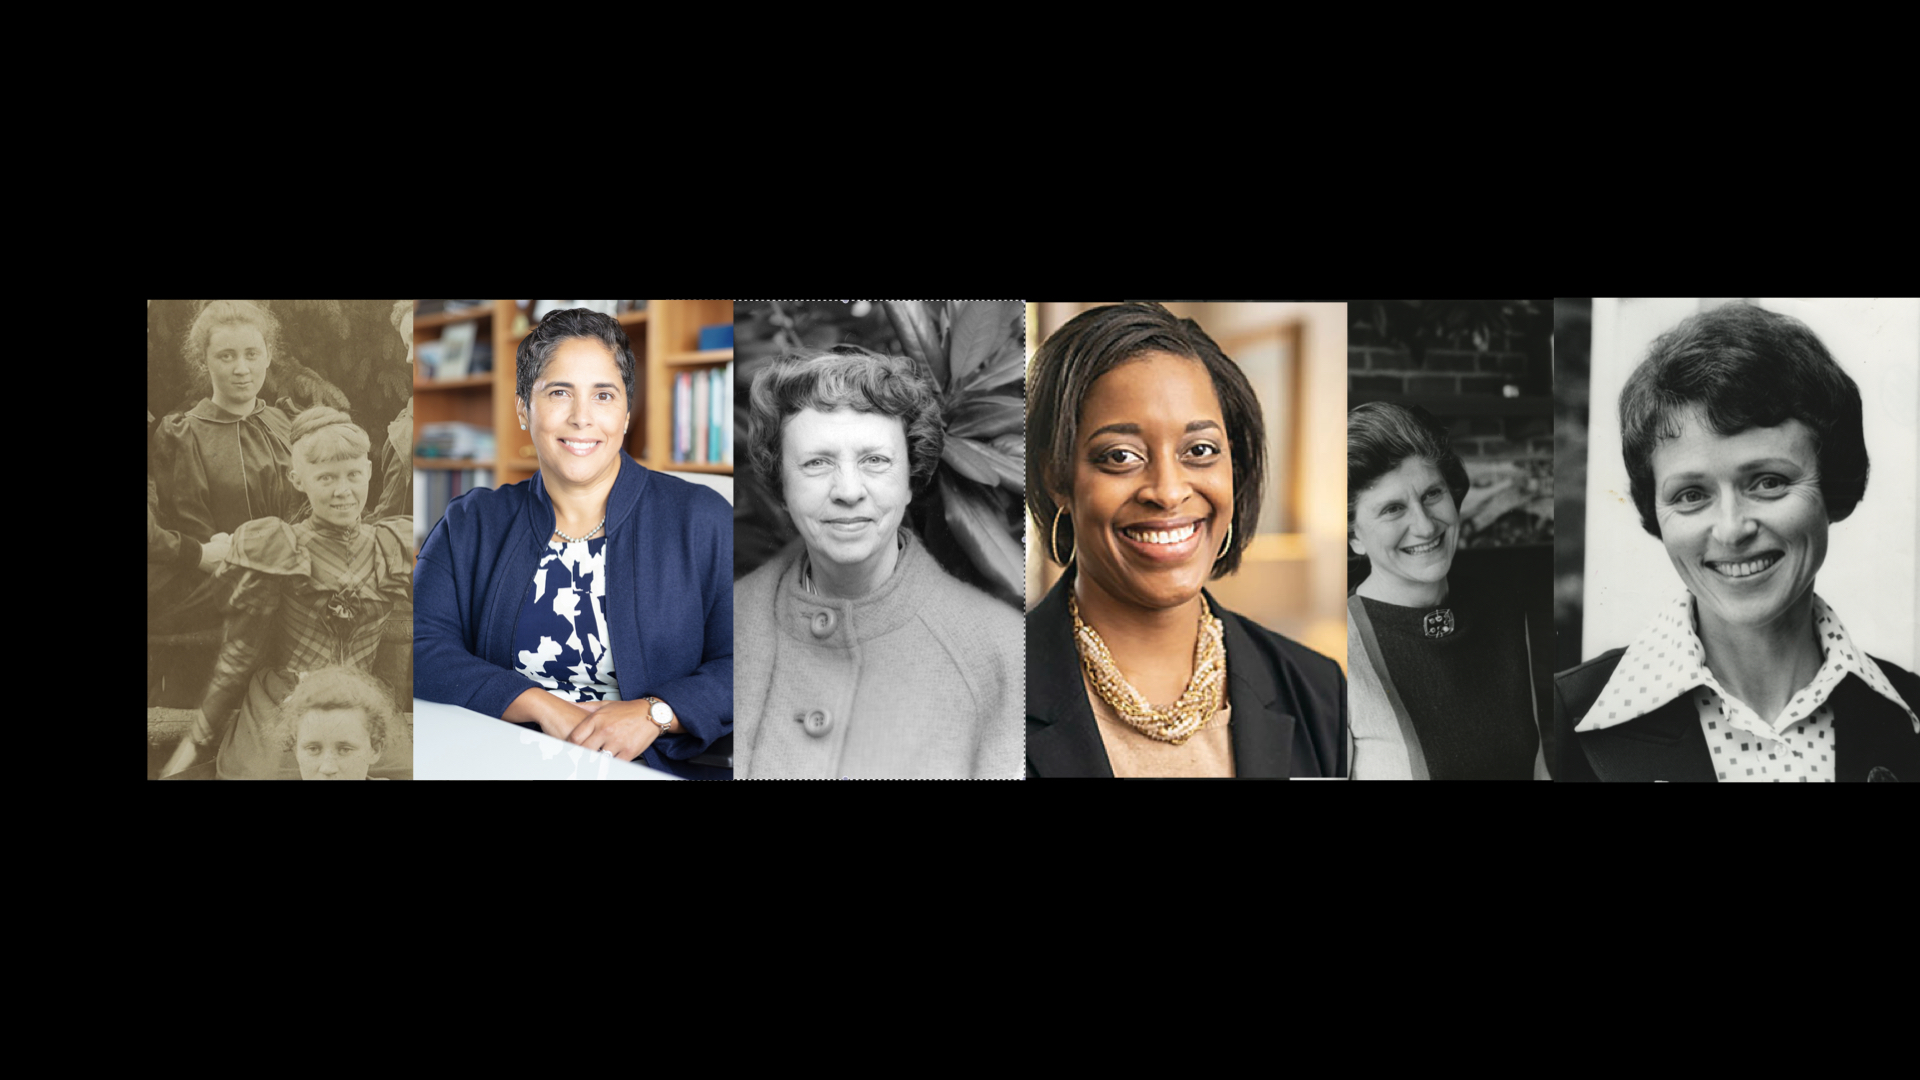 Six women who have helped shape the university and its history are being honored as part of a new Women at Vanderbilt Portrait Project at the Margaret Cuninggim Women’s Center.